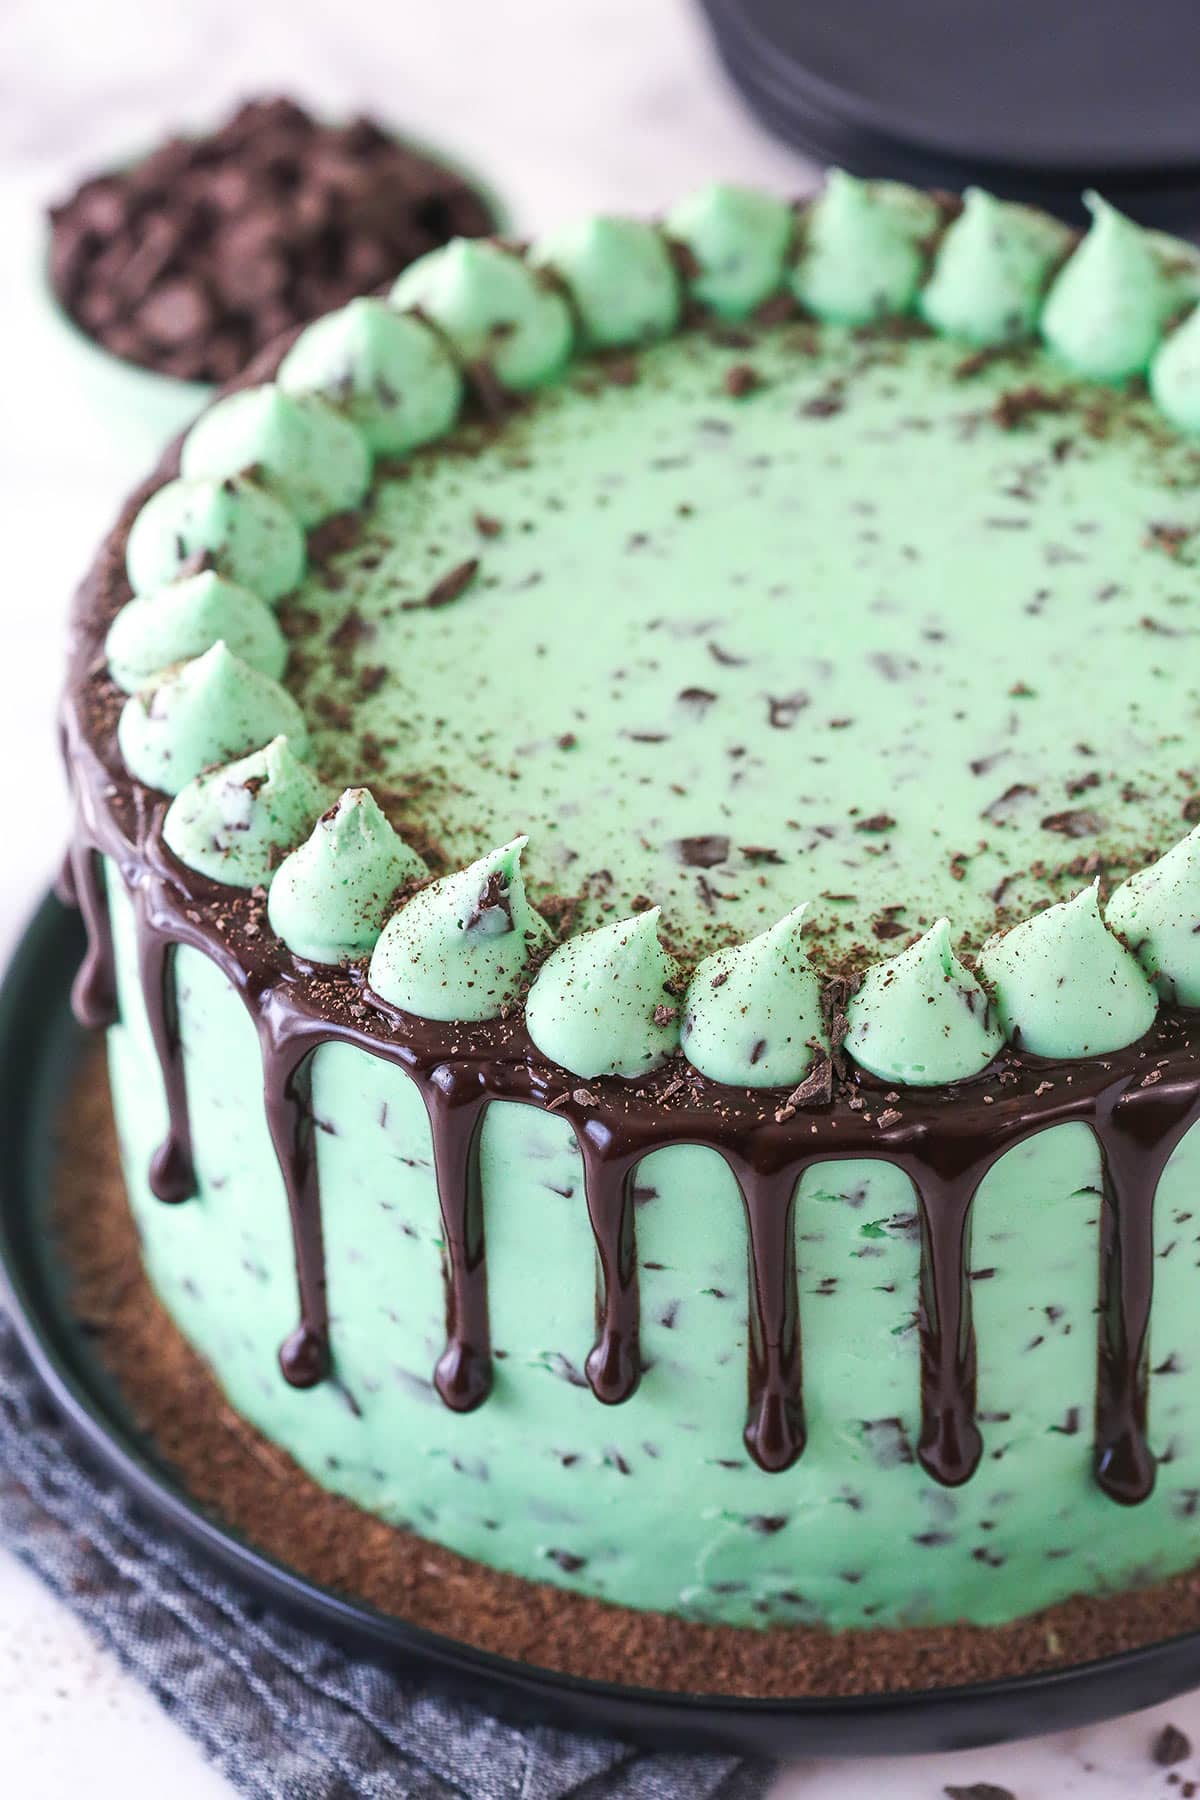 Overhead image of mint chocolate cake on a serving plate.